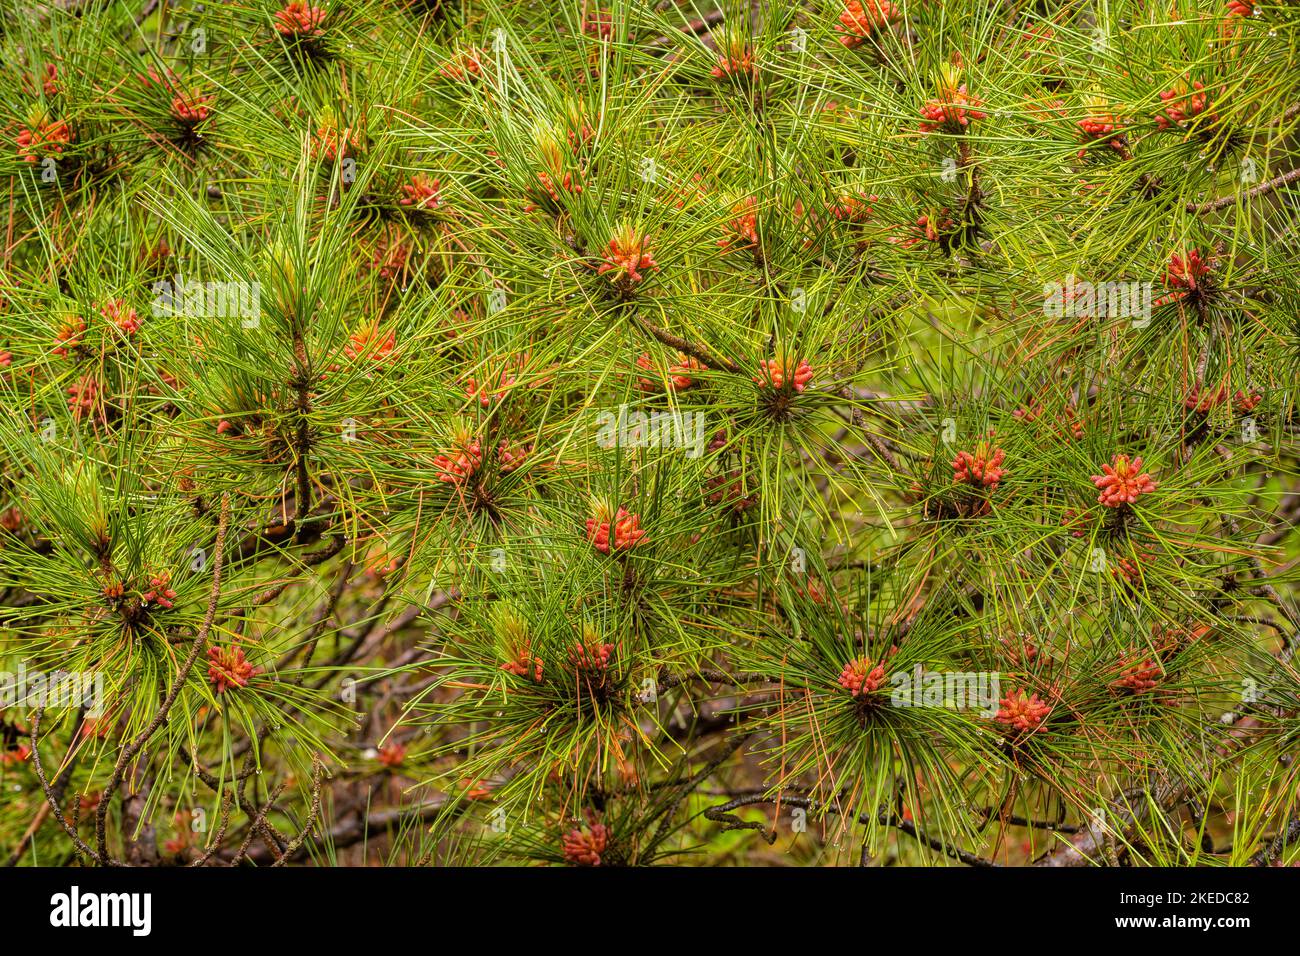 Red pine(Pinus resinosa). Cones and needles, Pinery Provincial Park, Grand Bend, Ontario, Canada Stock Photo